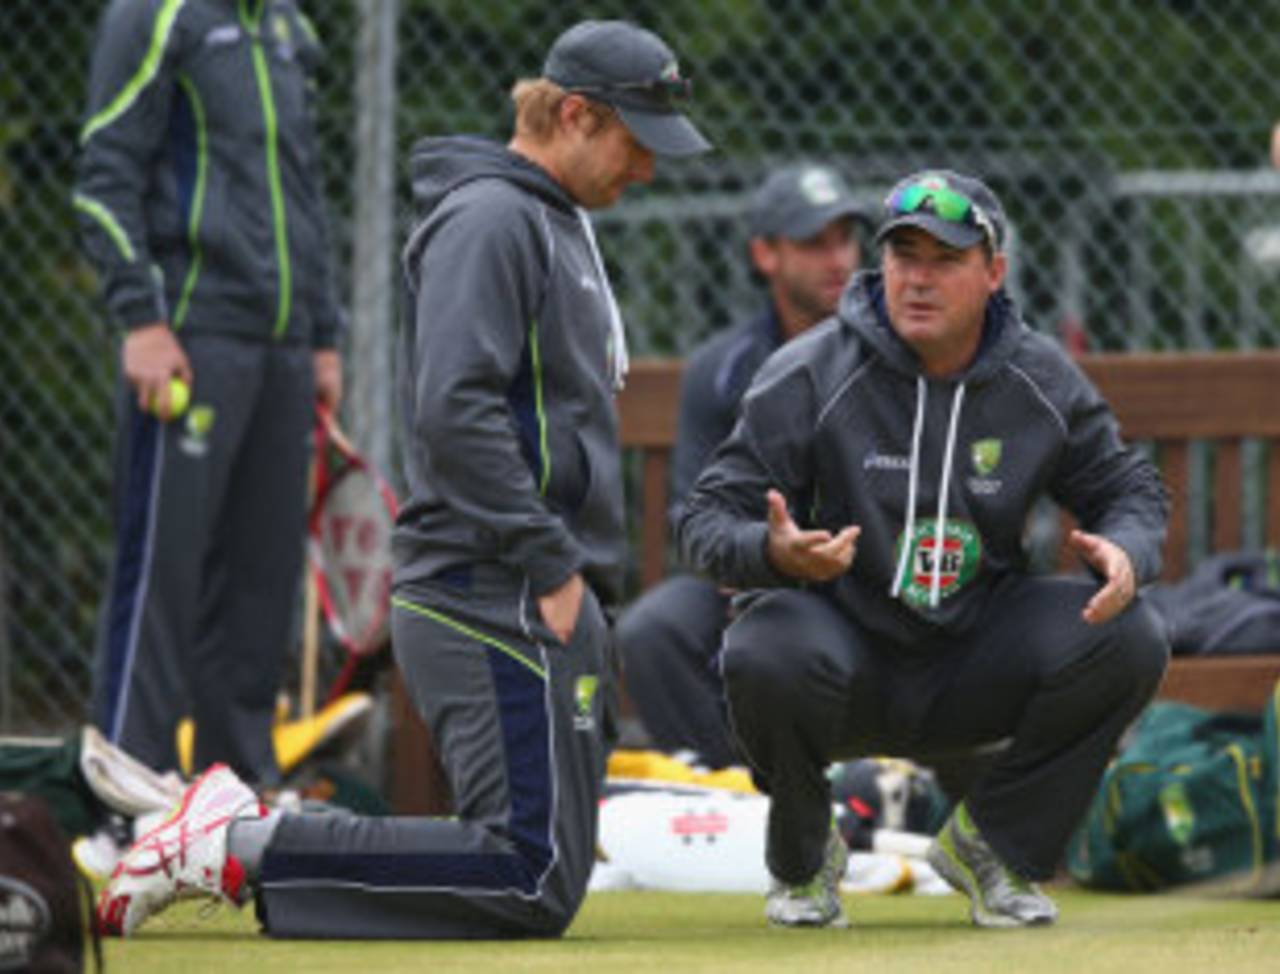 Shane Watson and Mickey Arthur at a practice session before their match against New Zealand, Edgbaston, June 11, 2013